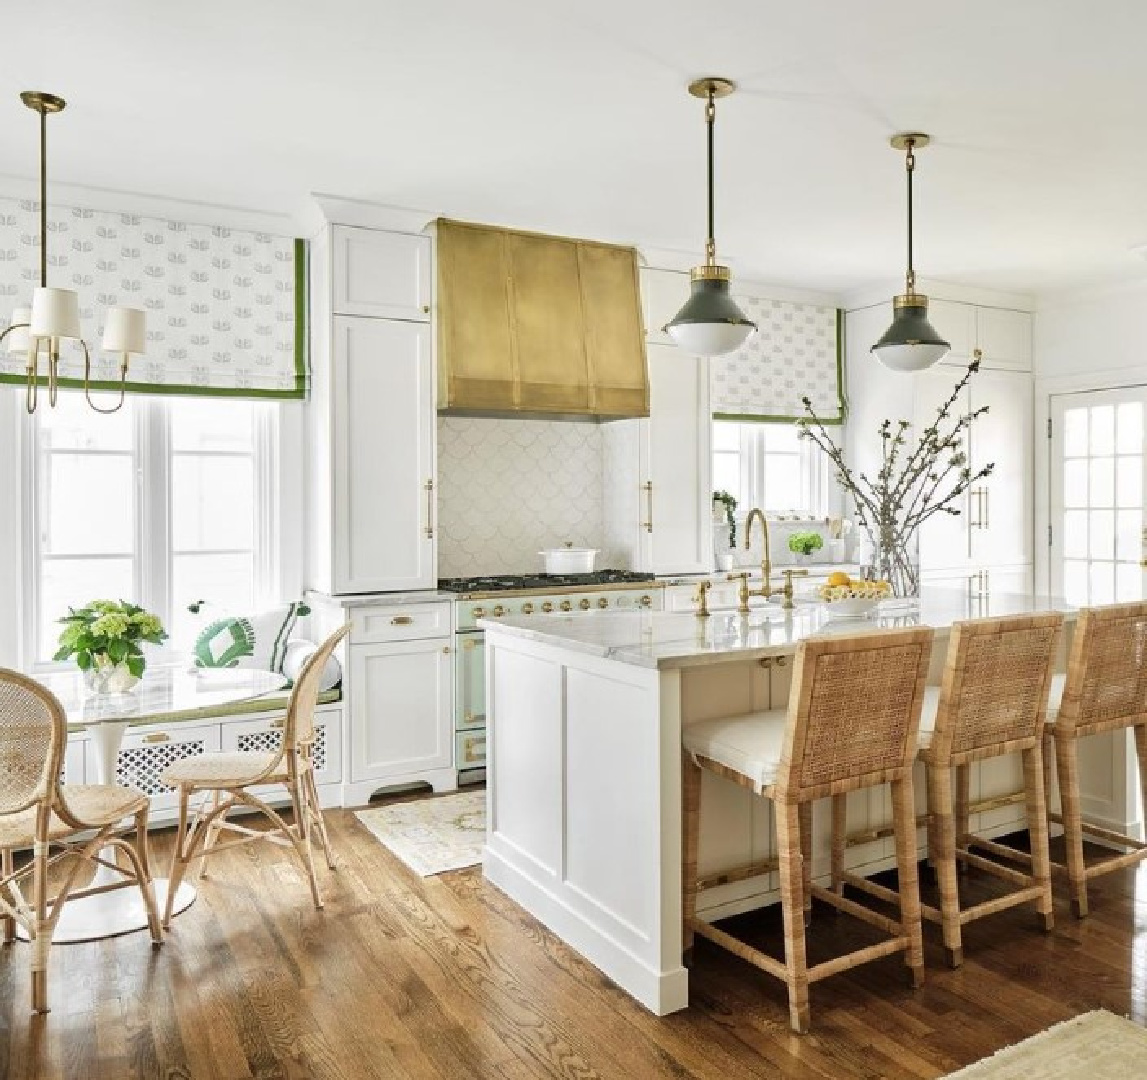 M. E. Beck Design - Benjamin Moore White Dove in renovated kitchen with brass range hood in Maria E. Beck's 1931 renovated Texas home. #traditionalstyle #bmwhitedove #timelesskitchen